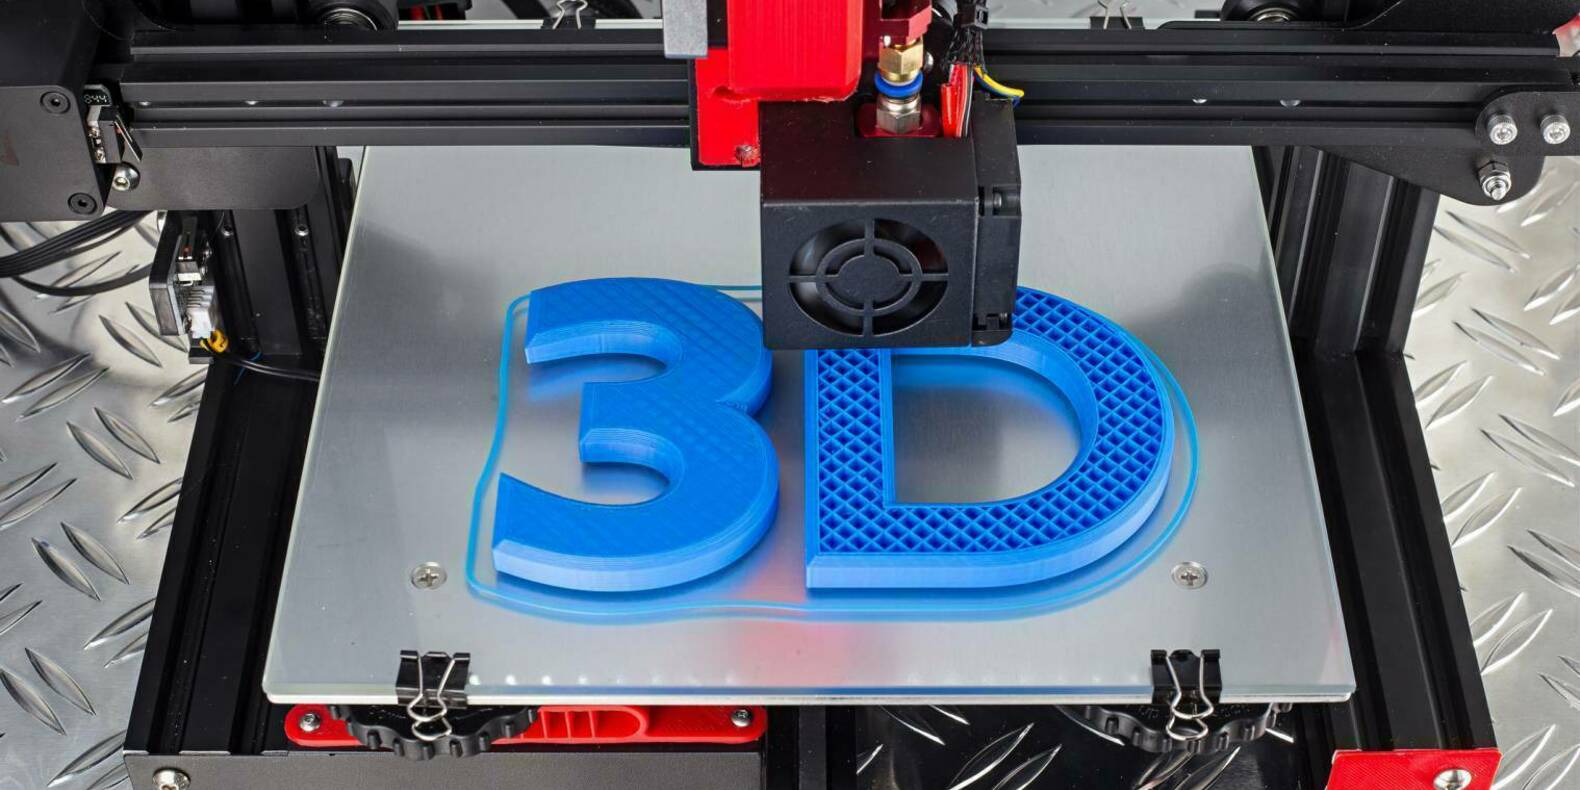 What File Does A 3D Printer Use